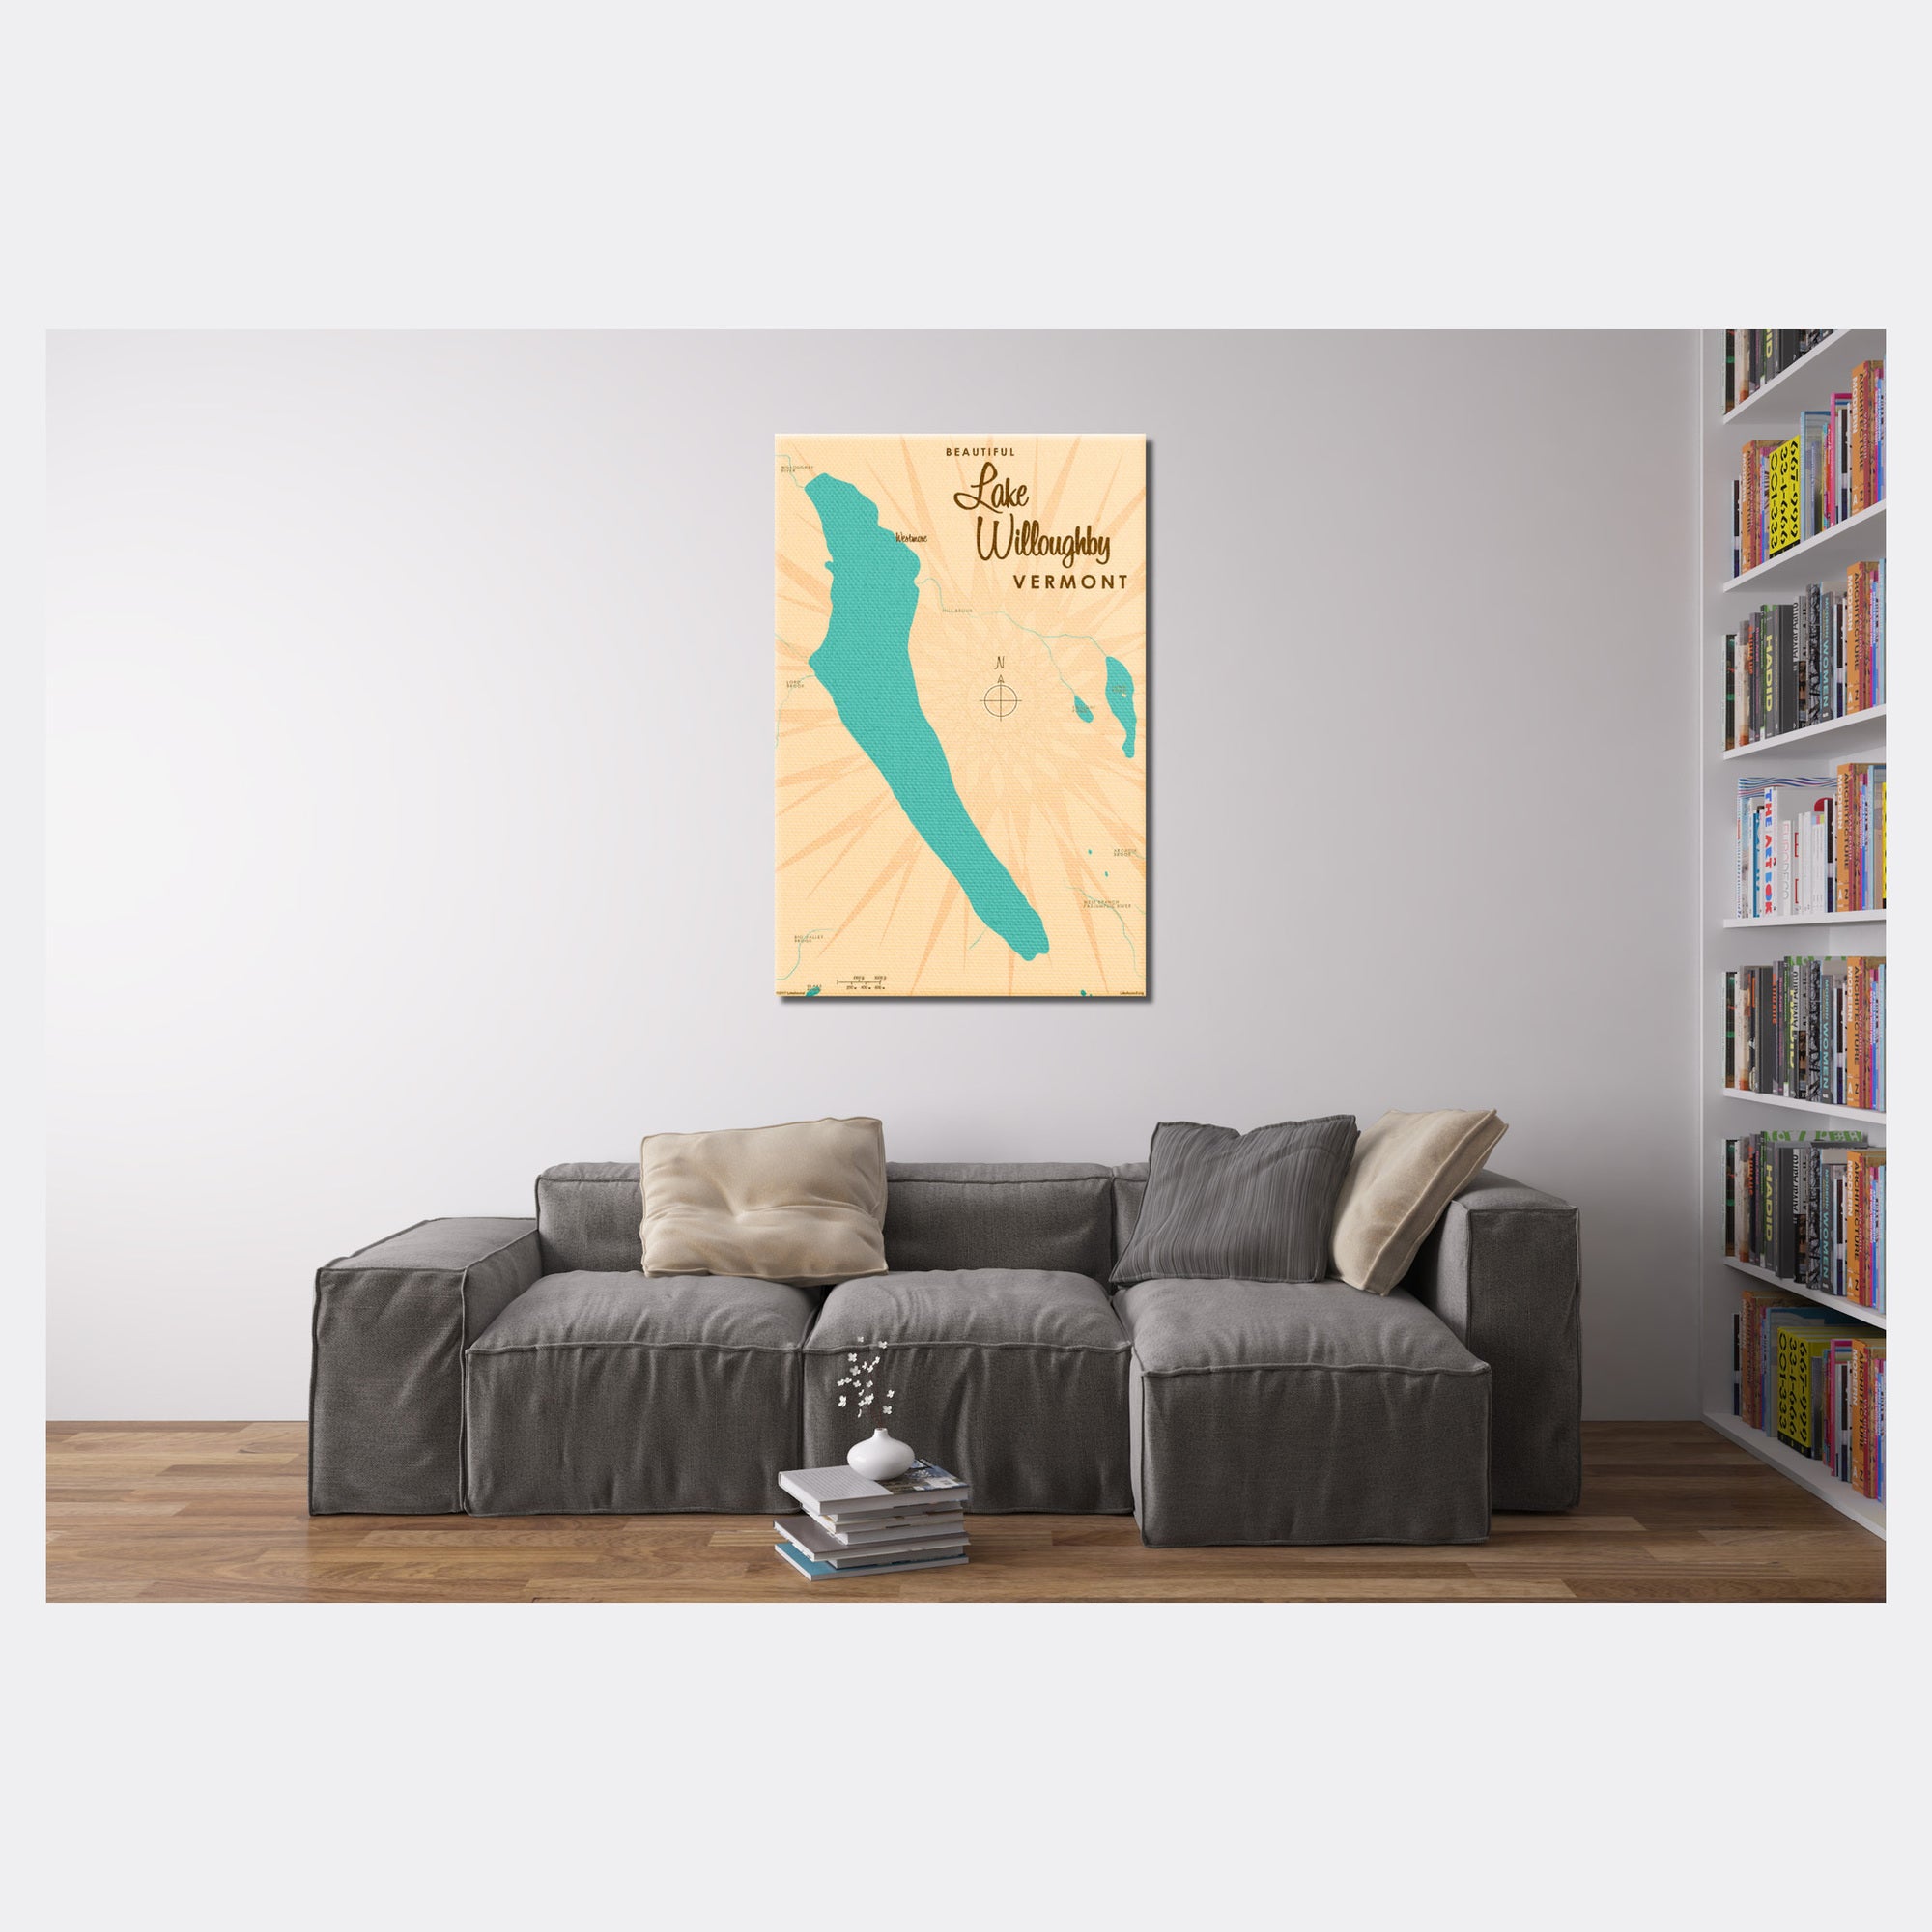 Lake Willoughby Vermont, Canvas Print